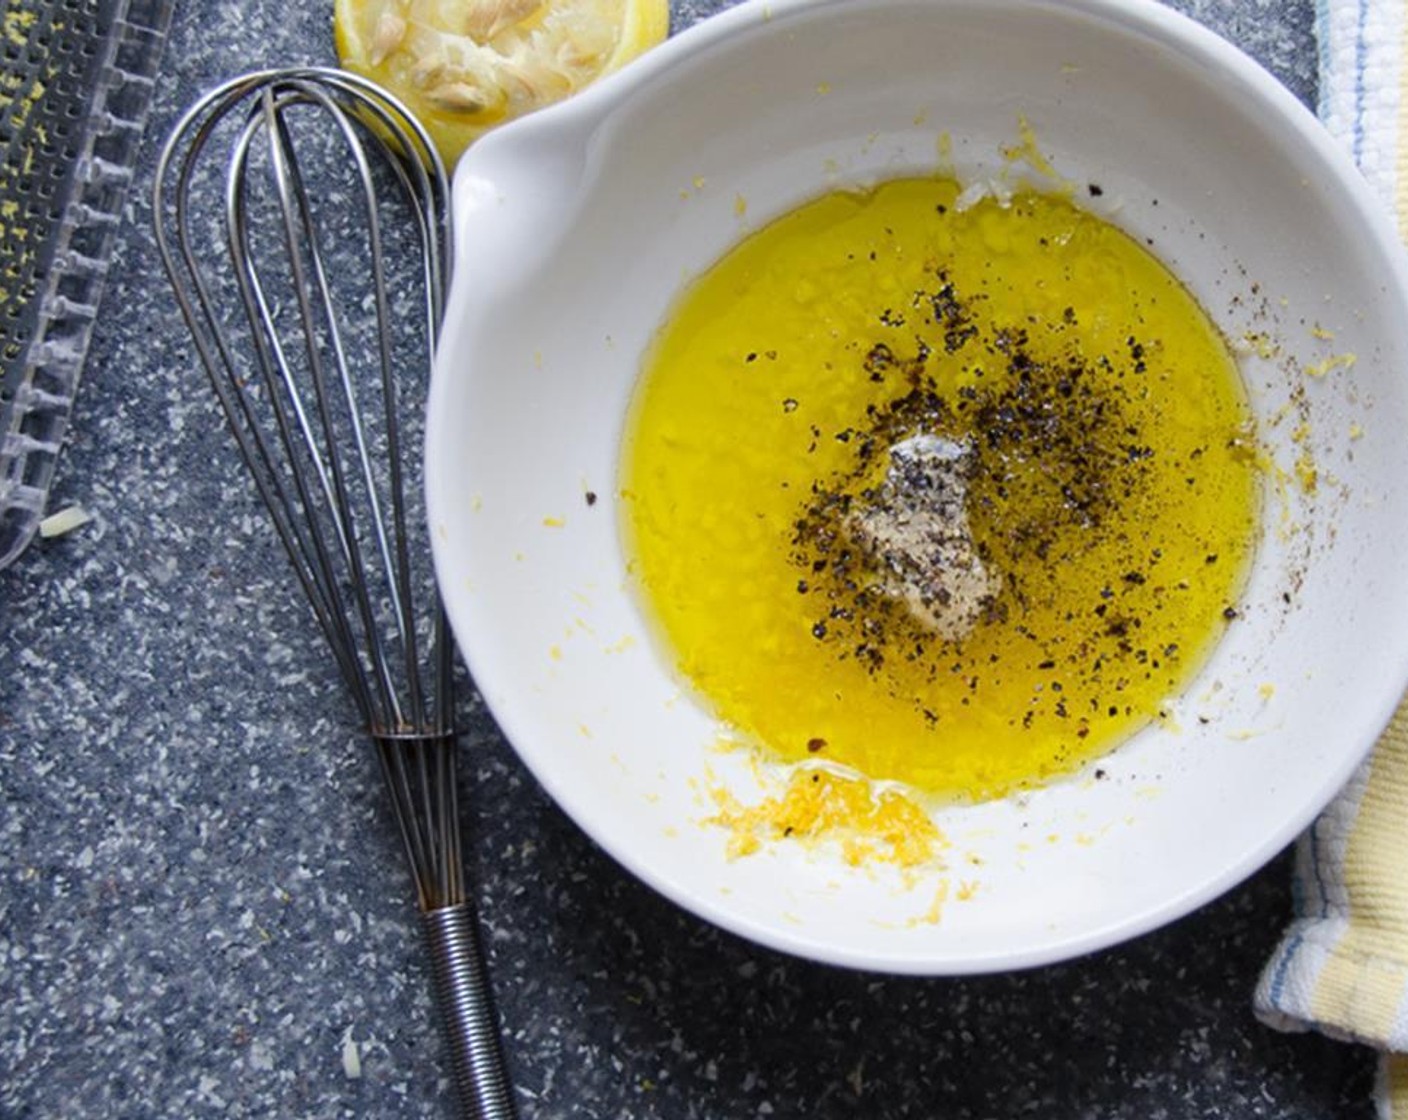 step 6 In a small bowl, zest the Lemon (1) and juice it. Mince the Garlic (1 clove). Then add Dijon Mustard (1 tsp), Olive Oil (1/4 cup), Kosher Salt (1/2 tsp) and Ground Black Pepper (1/4 tsp). Whisk together until emulsified.